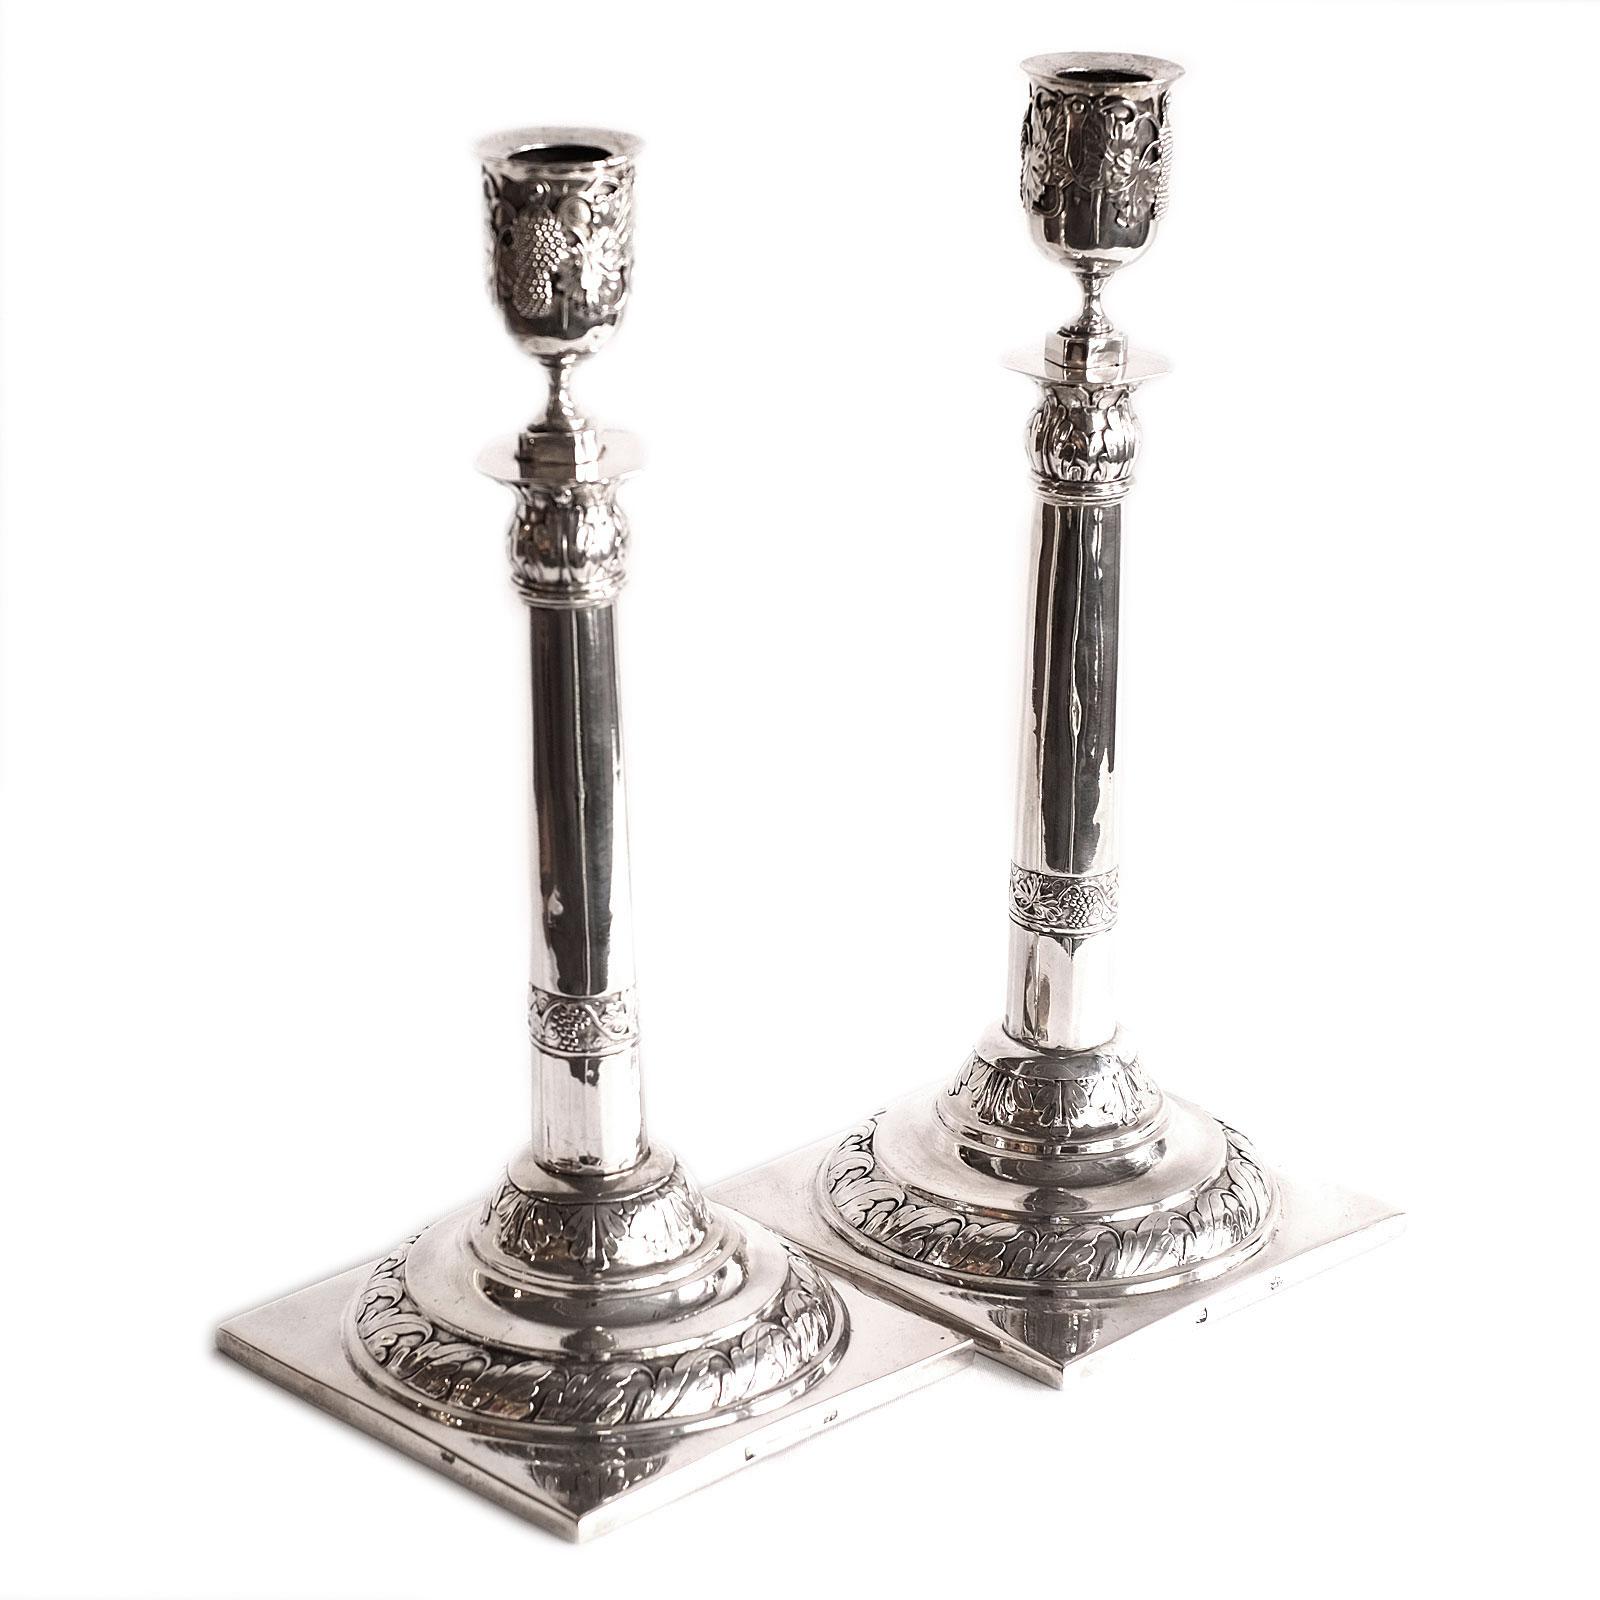 Neoclassical Pair of Silver Candlesticks A.F Burgmüller Leipzig Weissenfels 1820

Large, elegant candlesticks on a square plinth and a stepped round base surrounded by leaf borders, the column shaft decorated with vine leaf frieze and leaf capital,